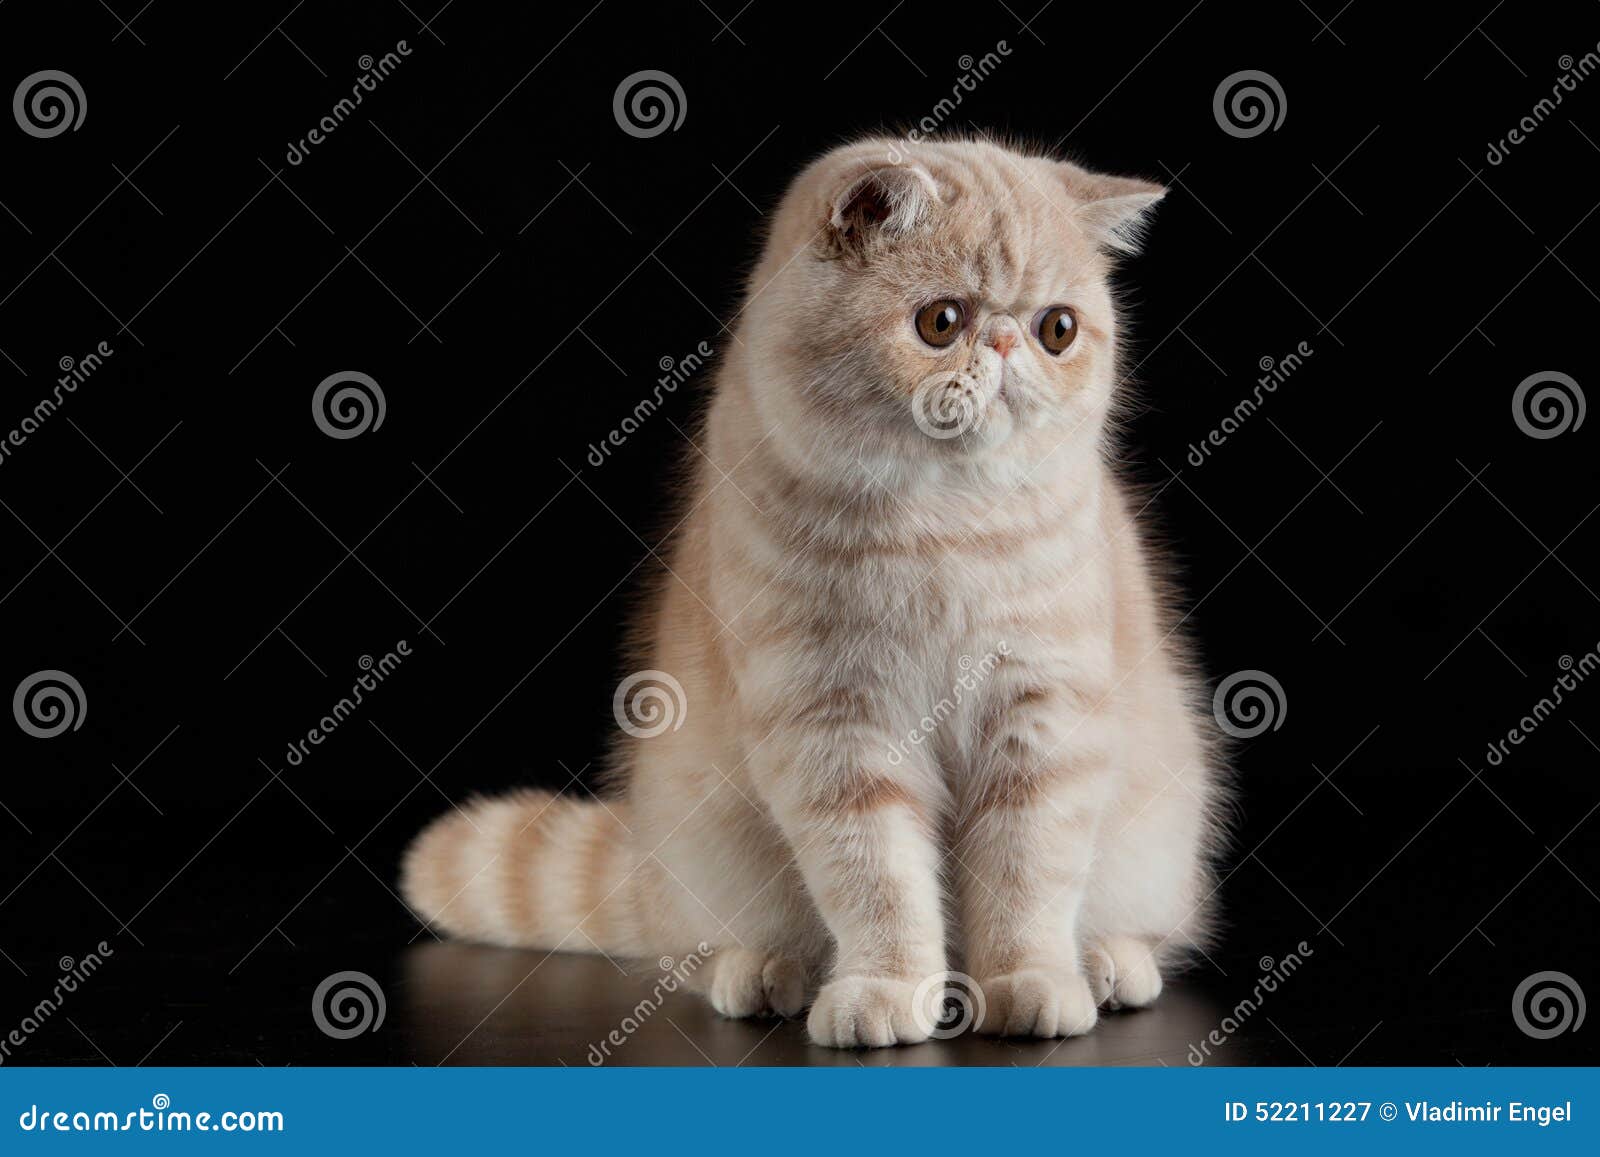 Exotic Persian Cat On Black Background Cat With Big Eyes Stock